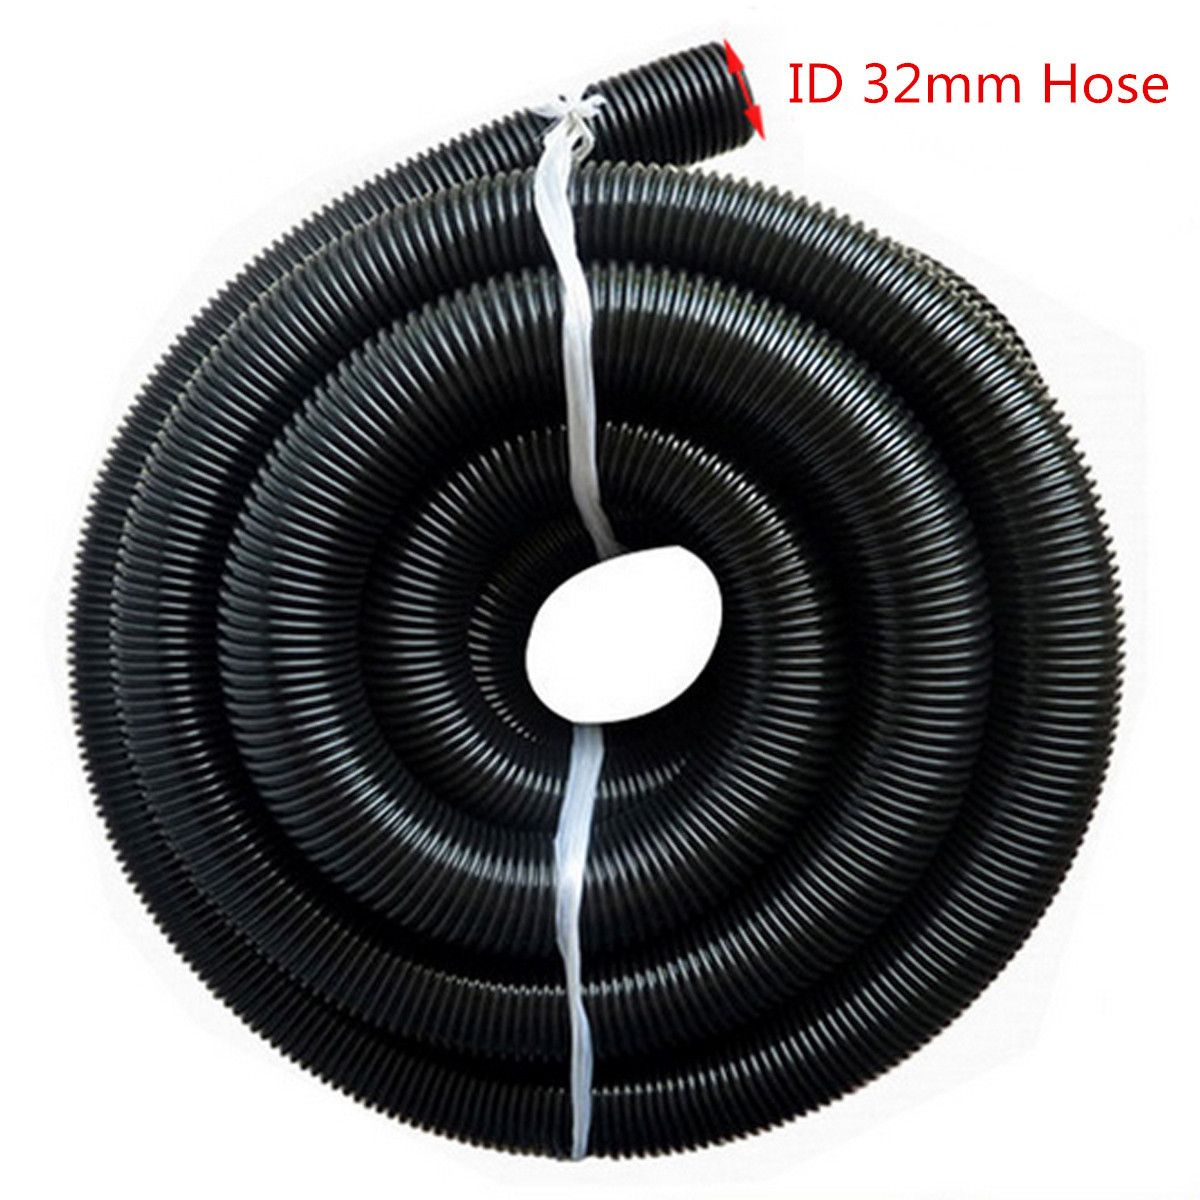 25mtimes32mm-EVA-Universal-Cleaner-Hose-Bellows-Straws-Vacuum-Cleaner-Parts-1088811